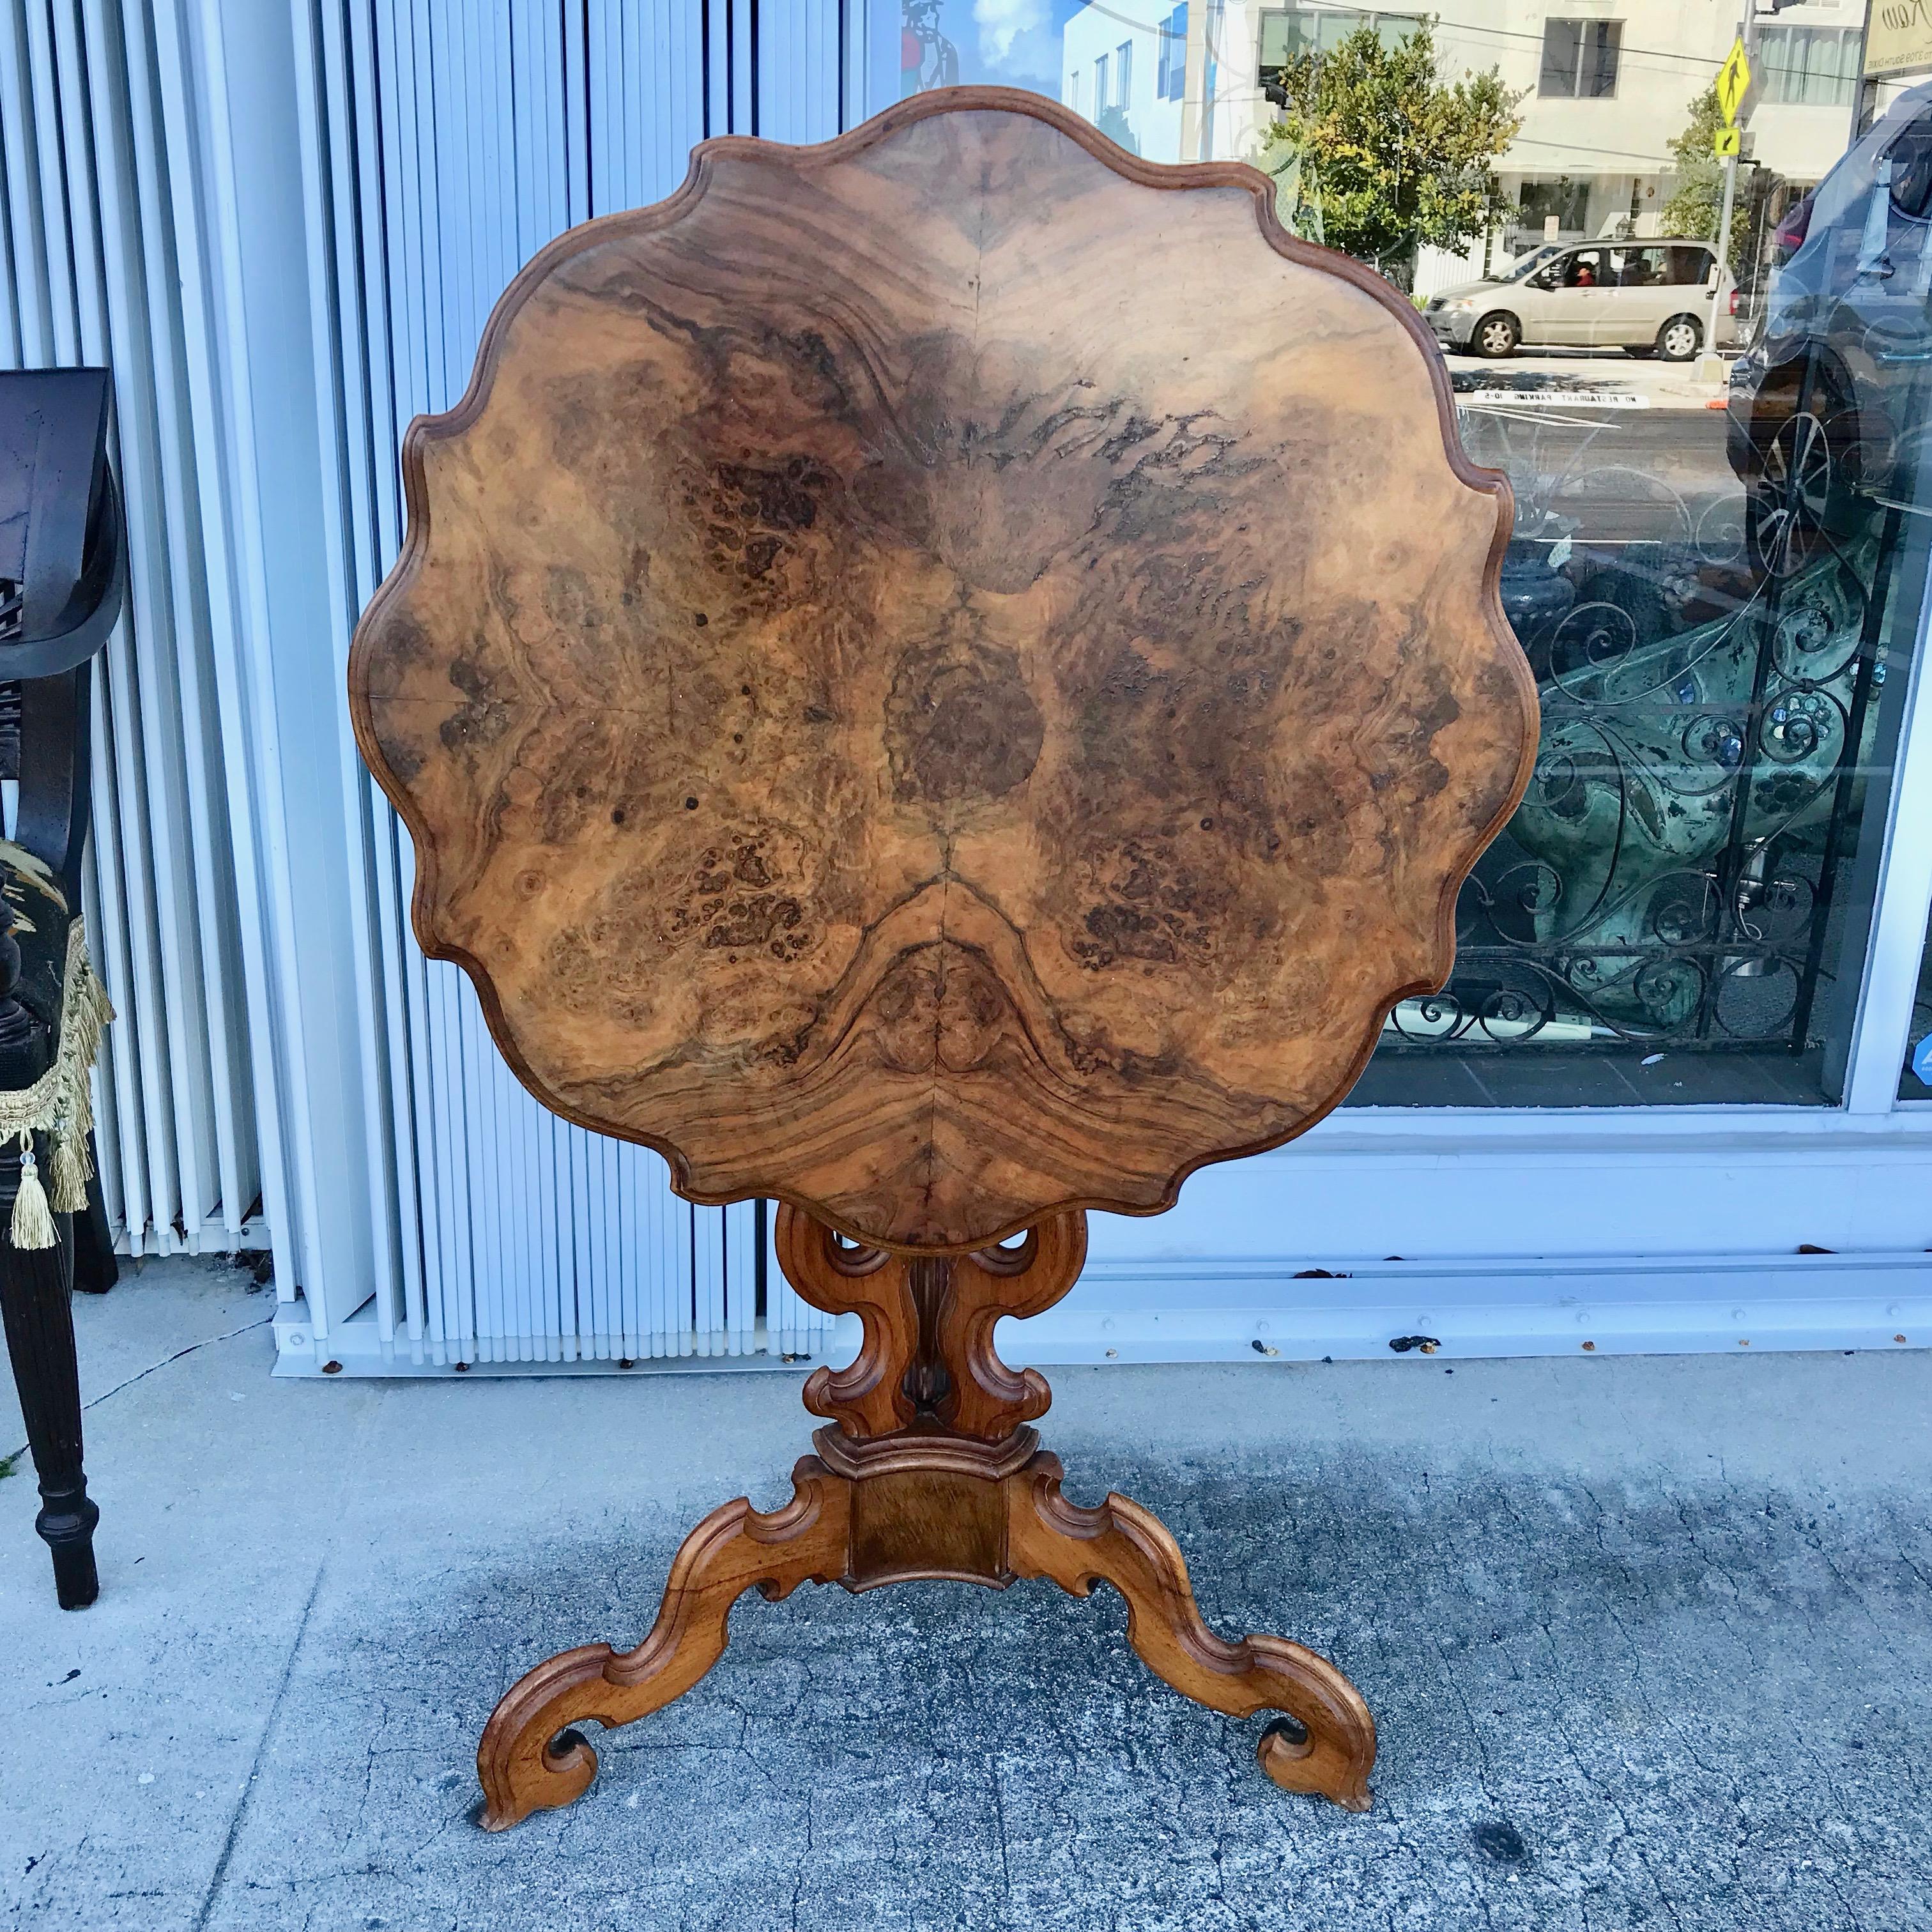 A beautiful and highly stylized tea table with a scalloped top.
The table is walnut with a burl walnut top. Taken from a fine home in Milan.
Superb quality and workmanship.